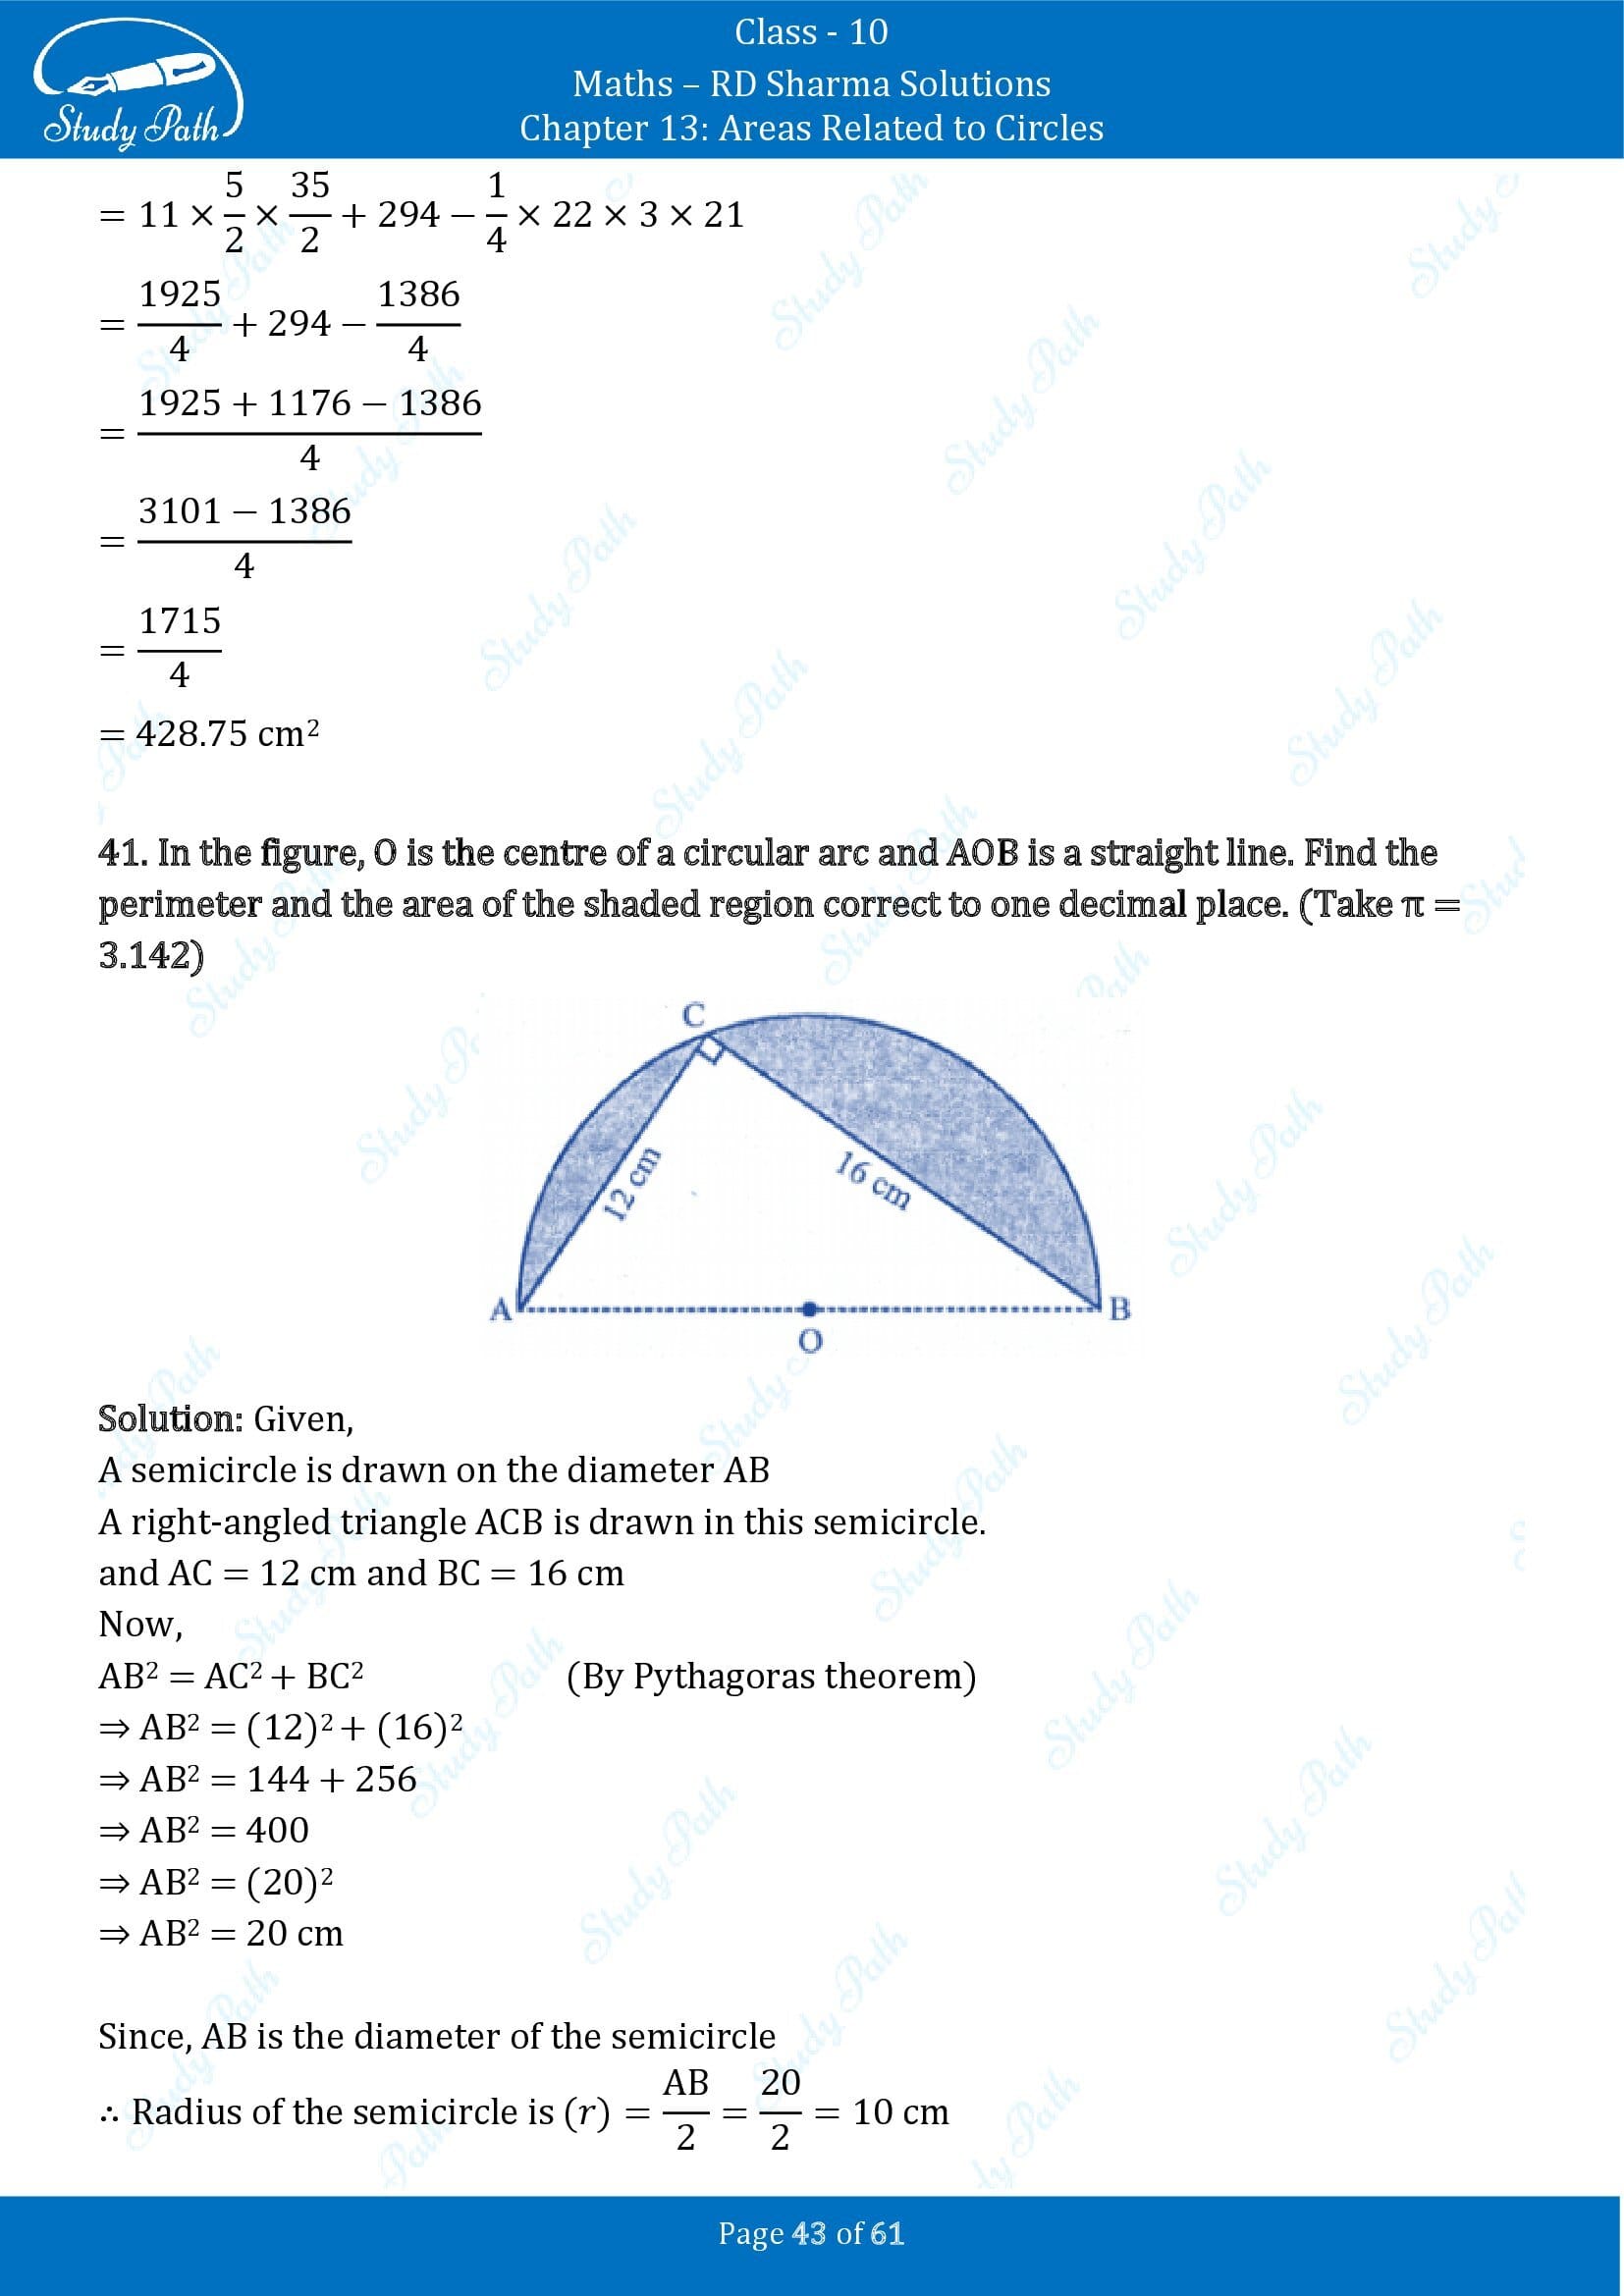 RD Sharma Solutions Class 10 Chapter 13 Areas Related to Circles Exercise 13.4 00043